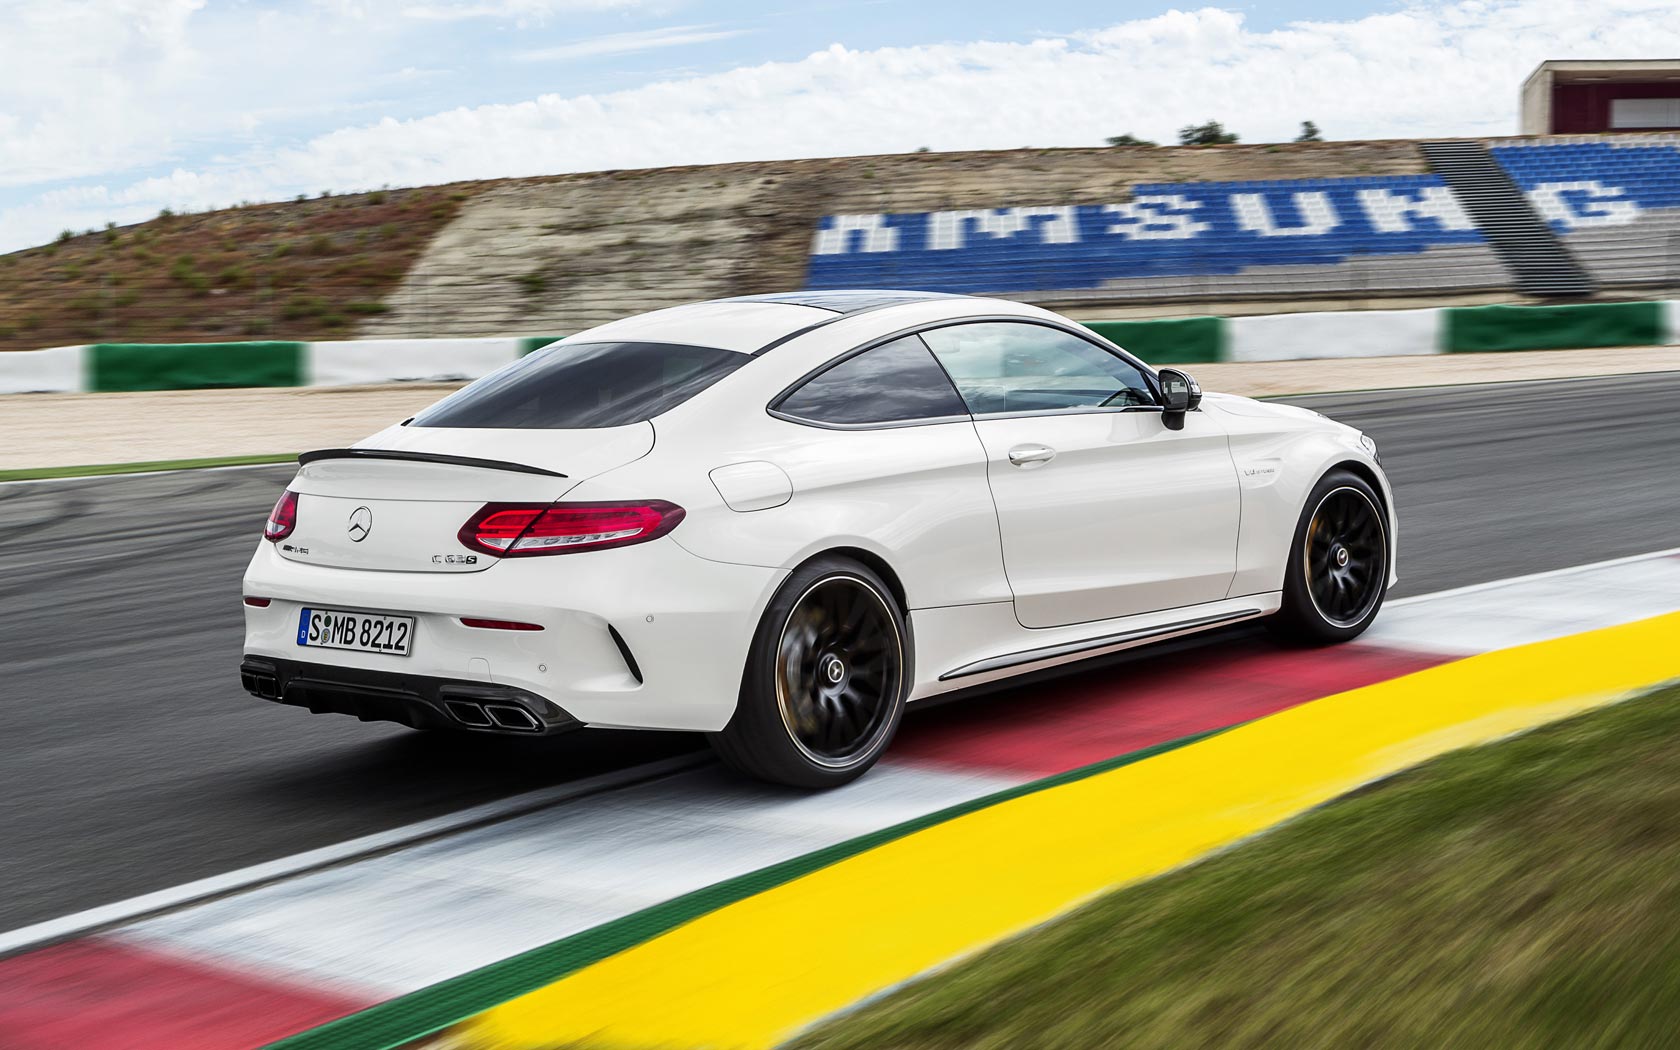  Mercedes C-Class AMG Coupe (2015-2018)